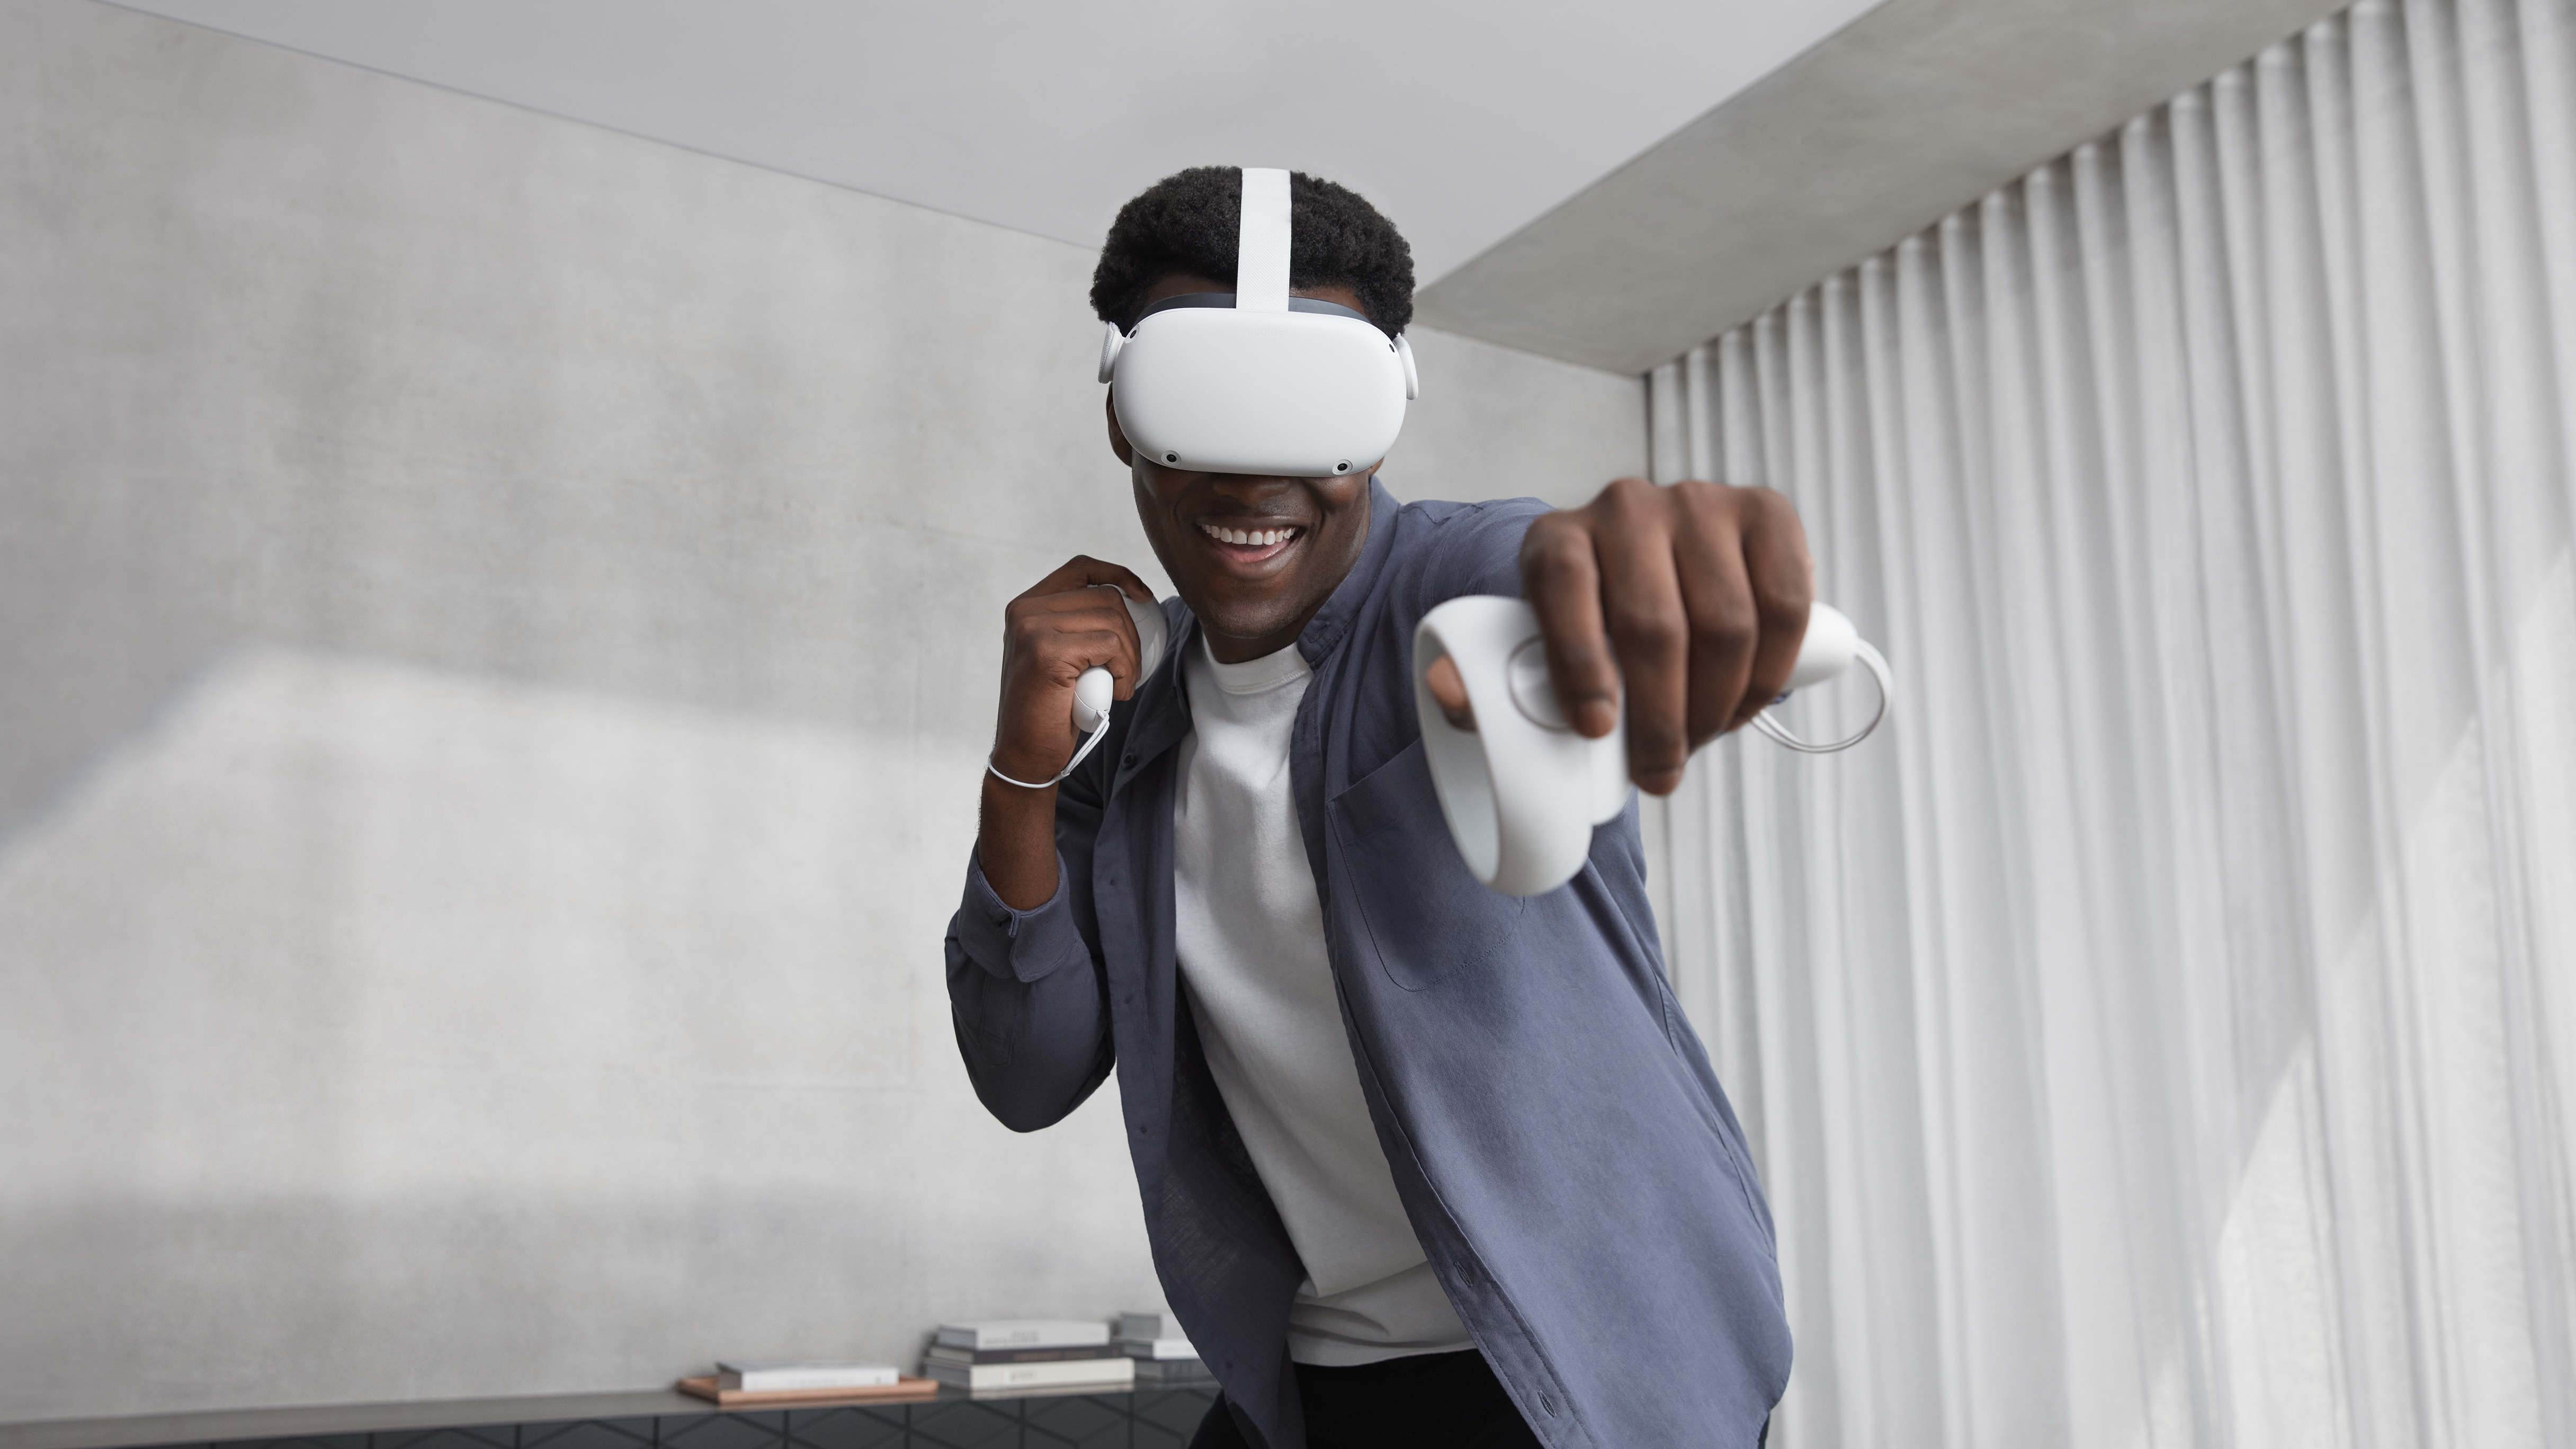 Oculus Quest 2 Review: "Improved experiences and more power make up for aesthetic trade-offs" | GamesRadar+